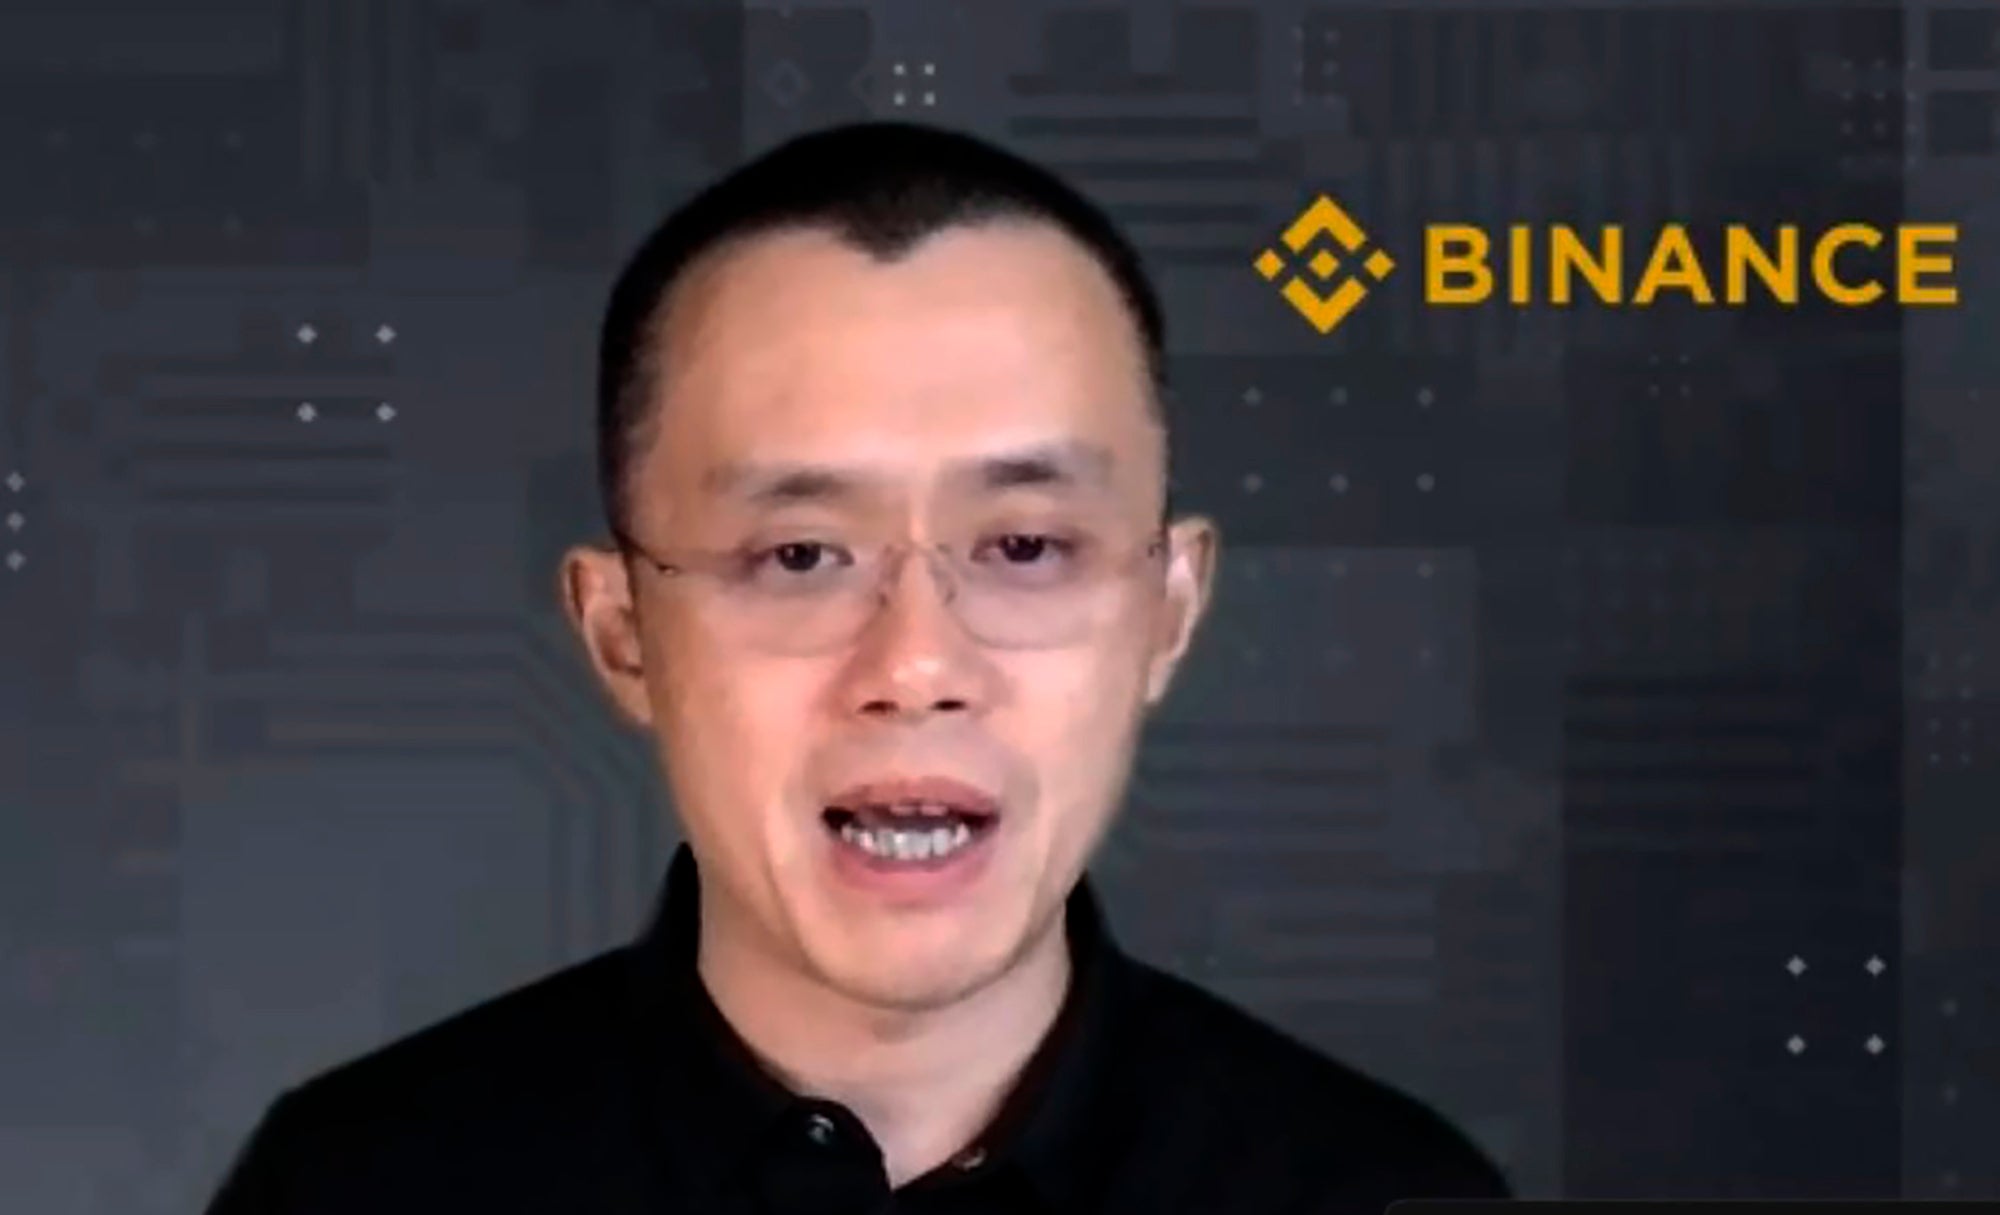 Binance CEO and founder Changpeng Zhao, known as CZ, is a bitter rival of SBF